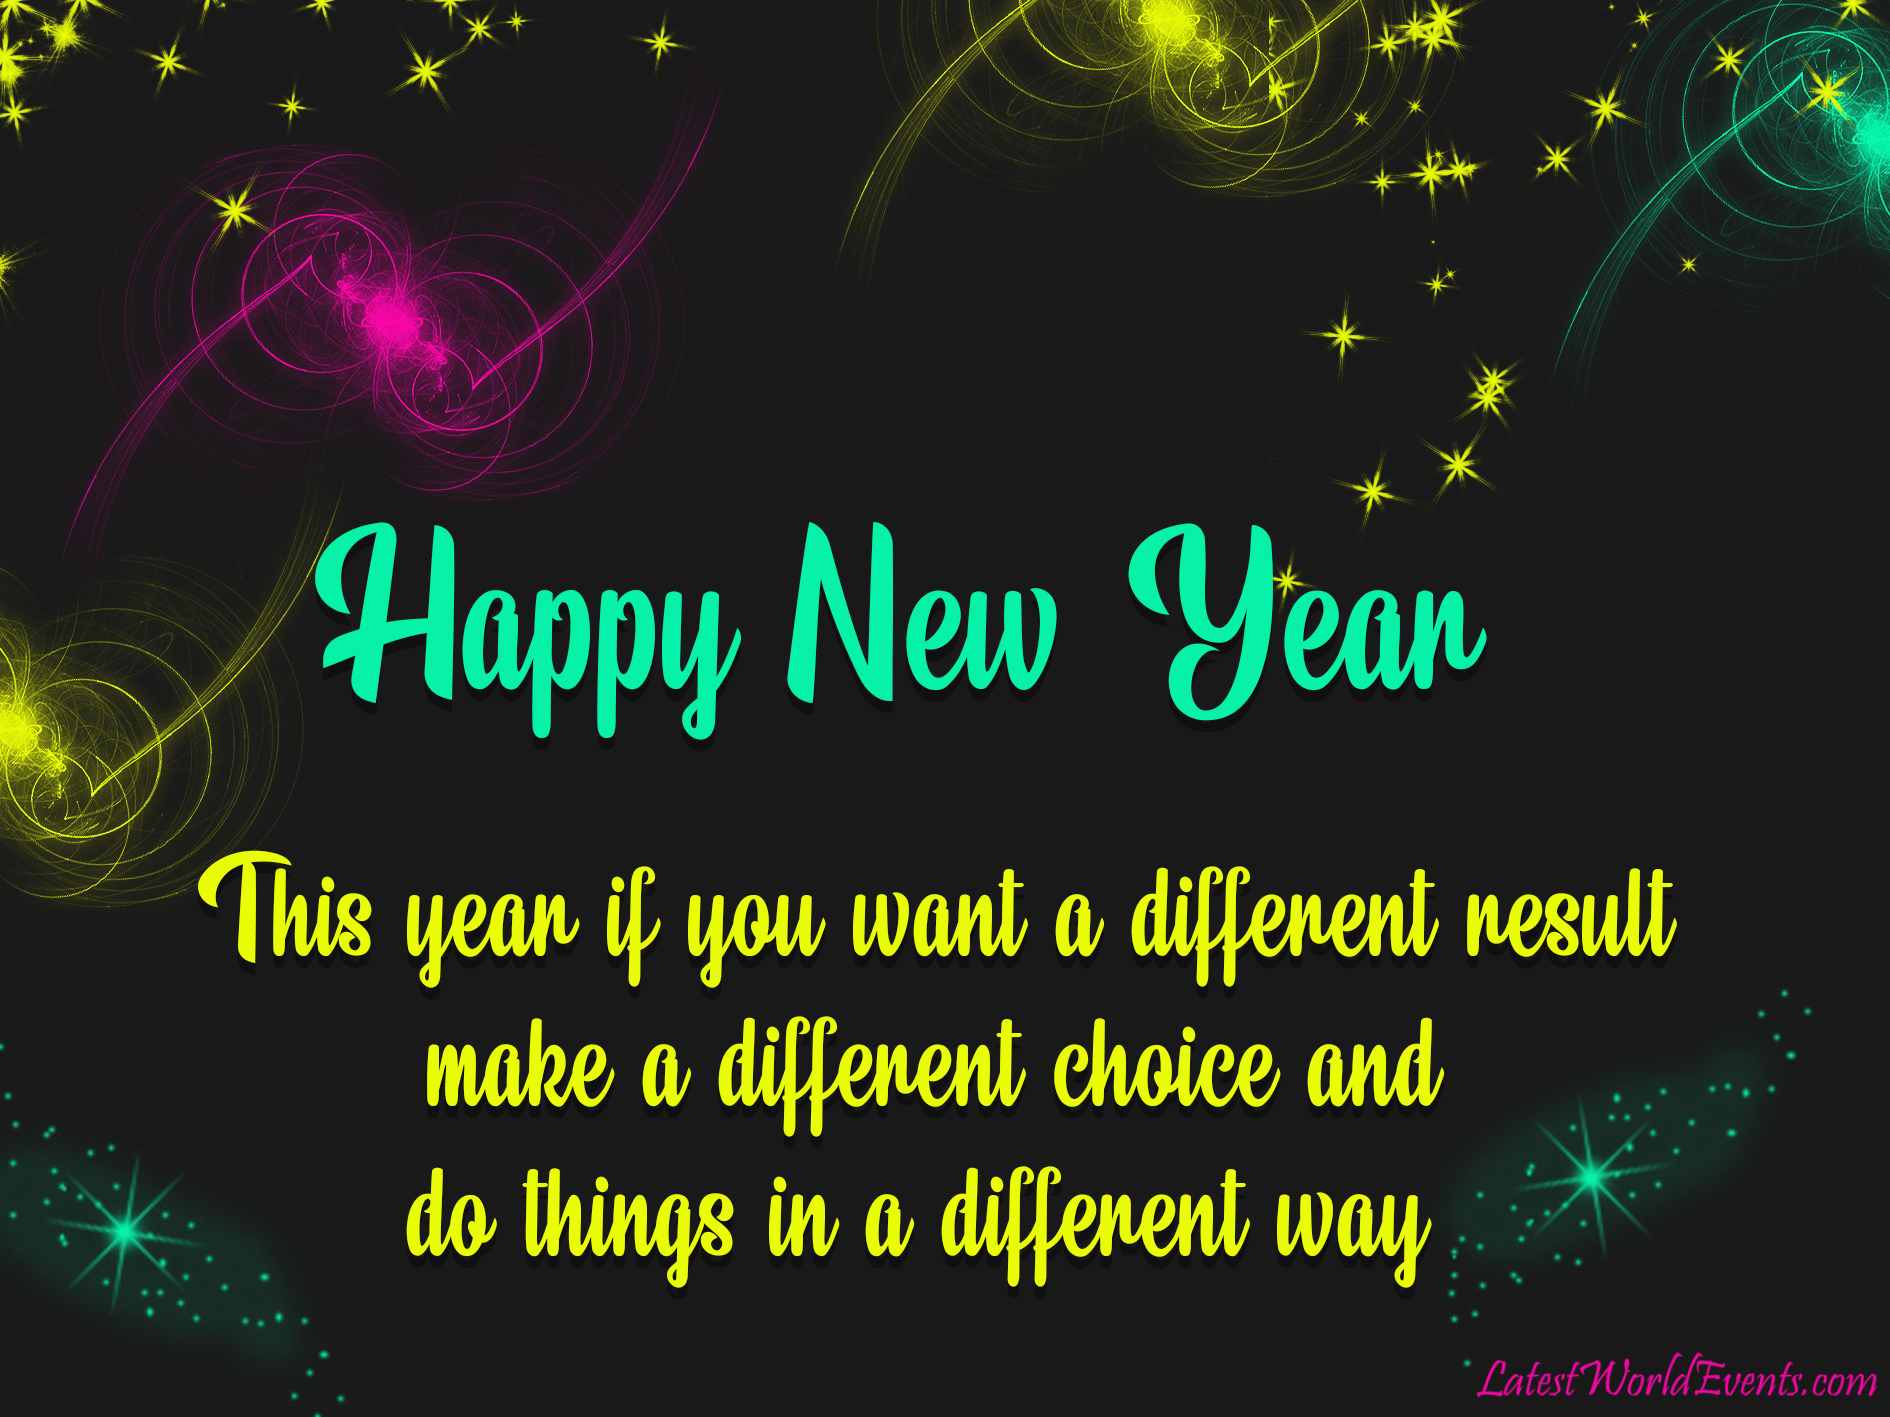 Famous-new-year-wishes-quotes-images